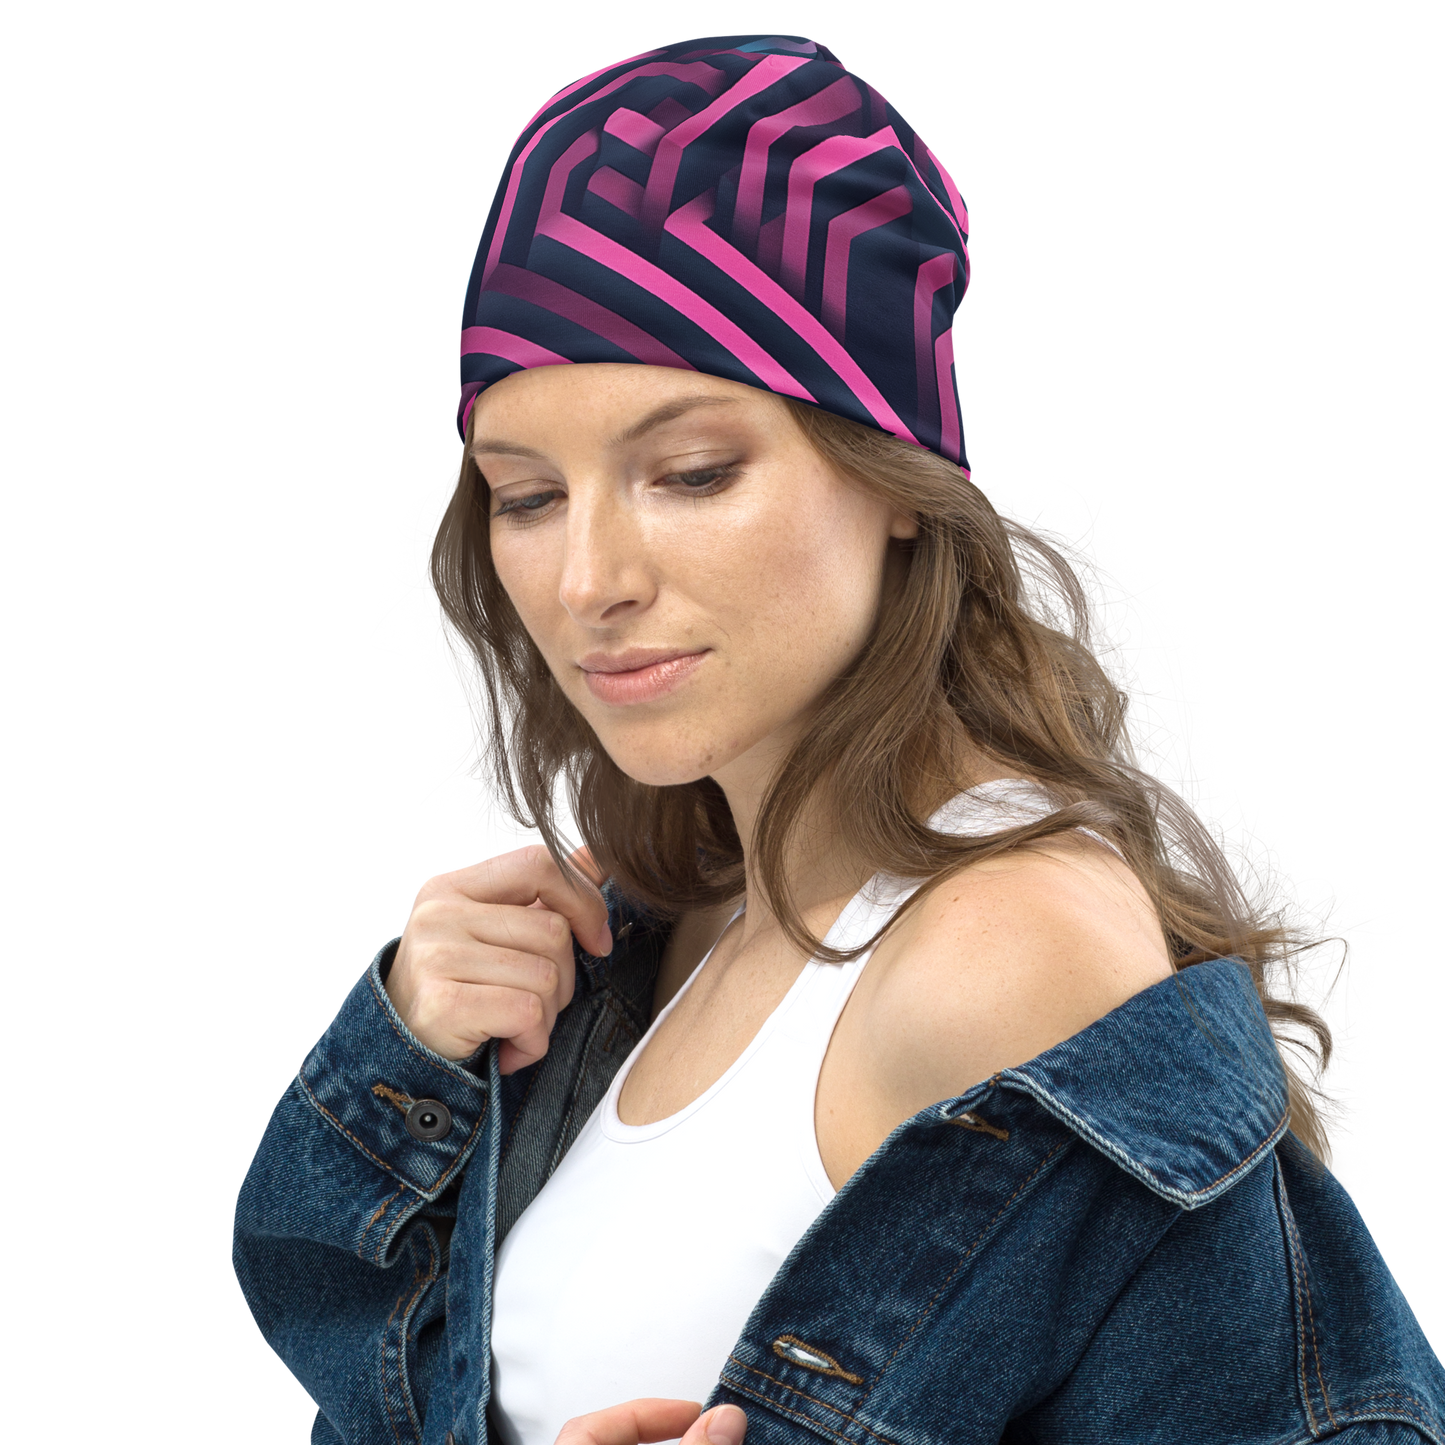 3D Maze Illusion | 3D Patterns | All-Over Print Beanie - #4